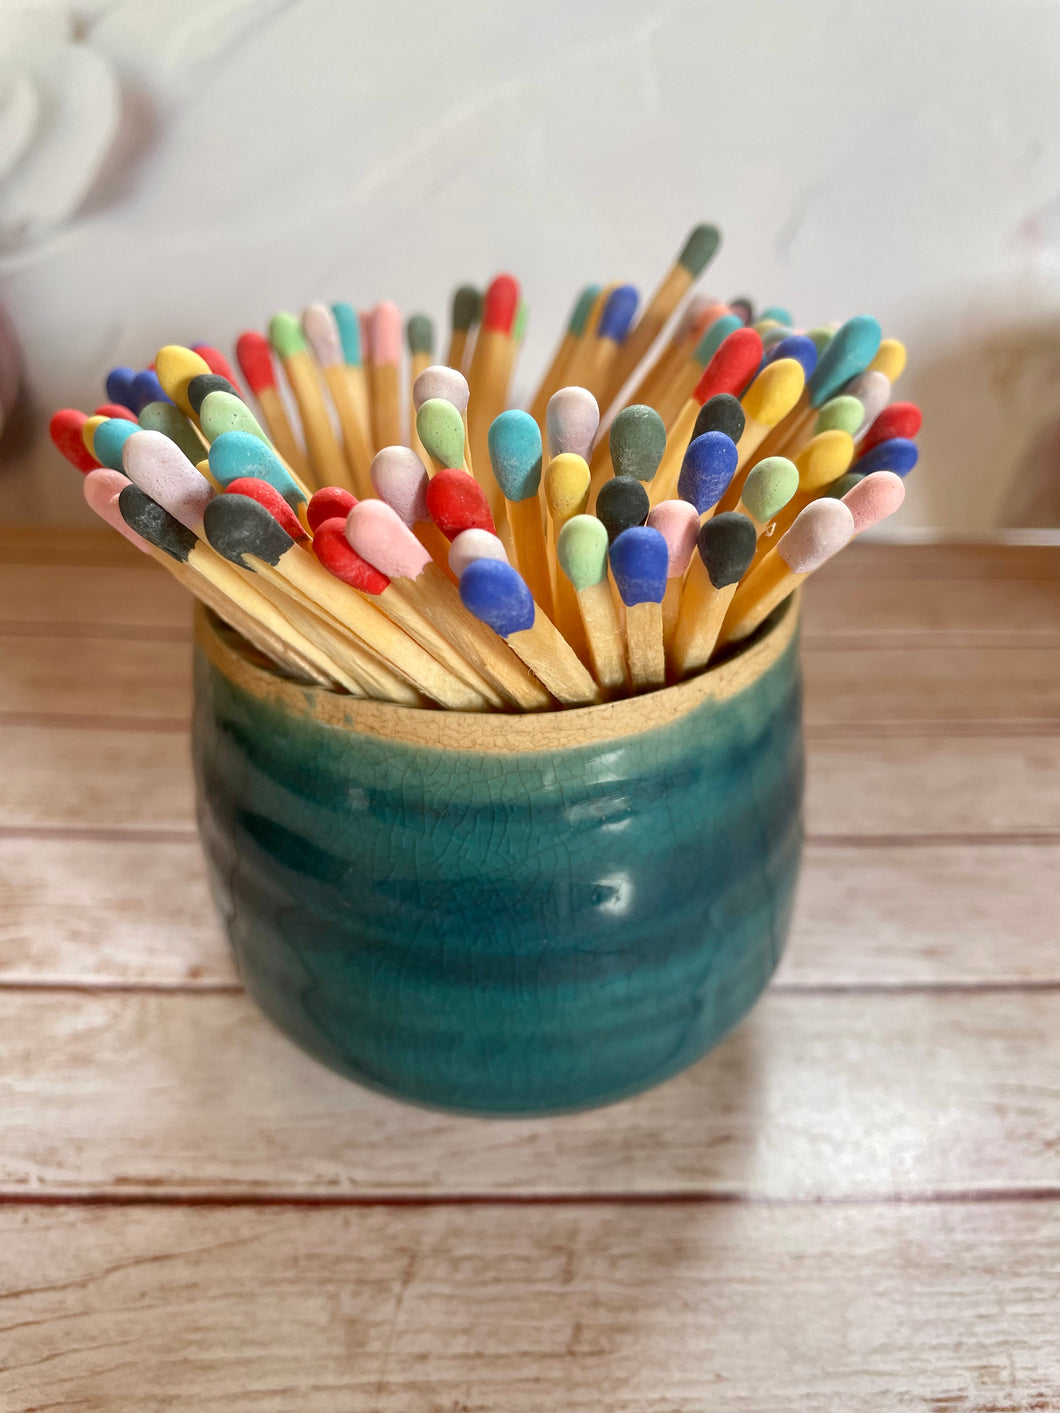 Handmade Ceramic Match Pot and Strike Pad, Rainbow Coloured Extra Long Matches, Gift for Candle Lovers, Wax Melt Gift Ideas, Matchstick Pot - Various Designs